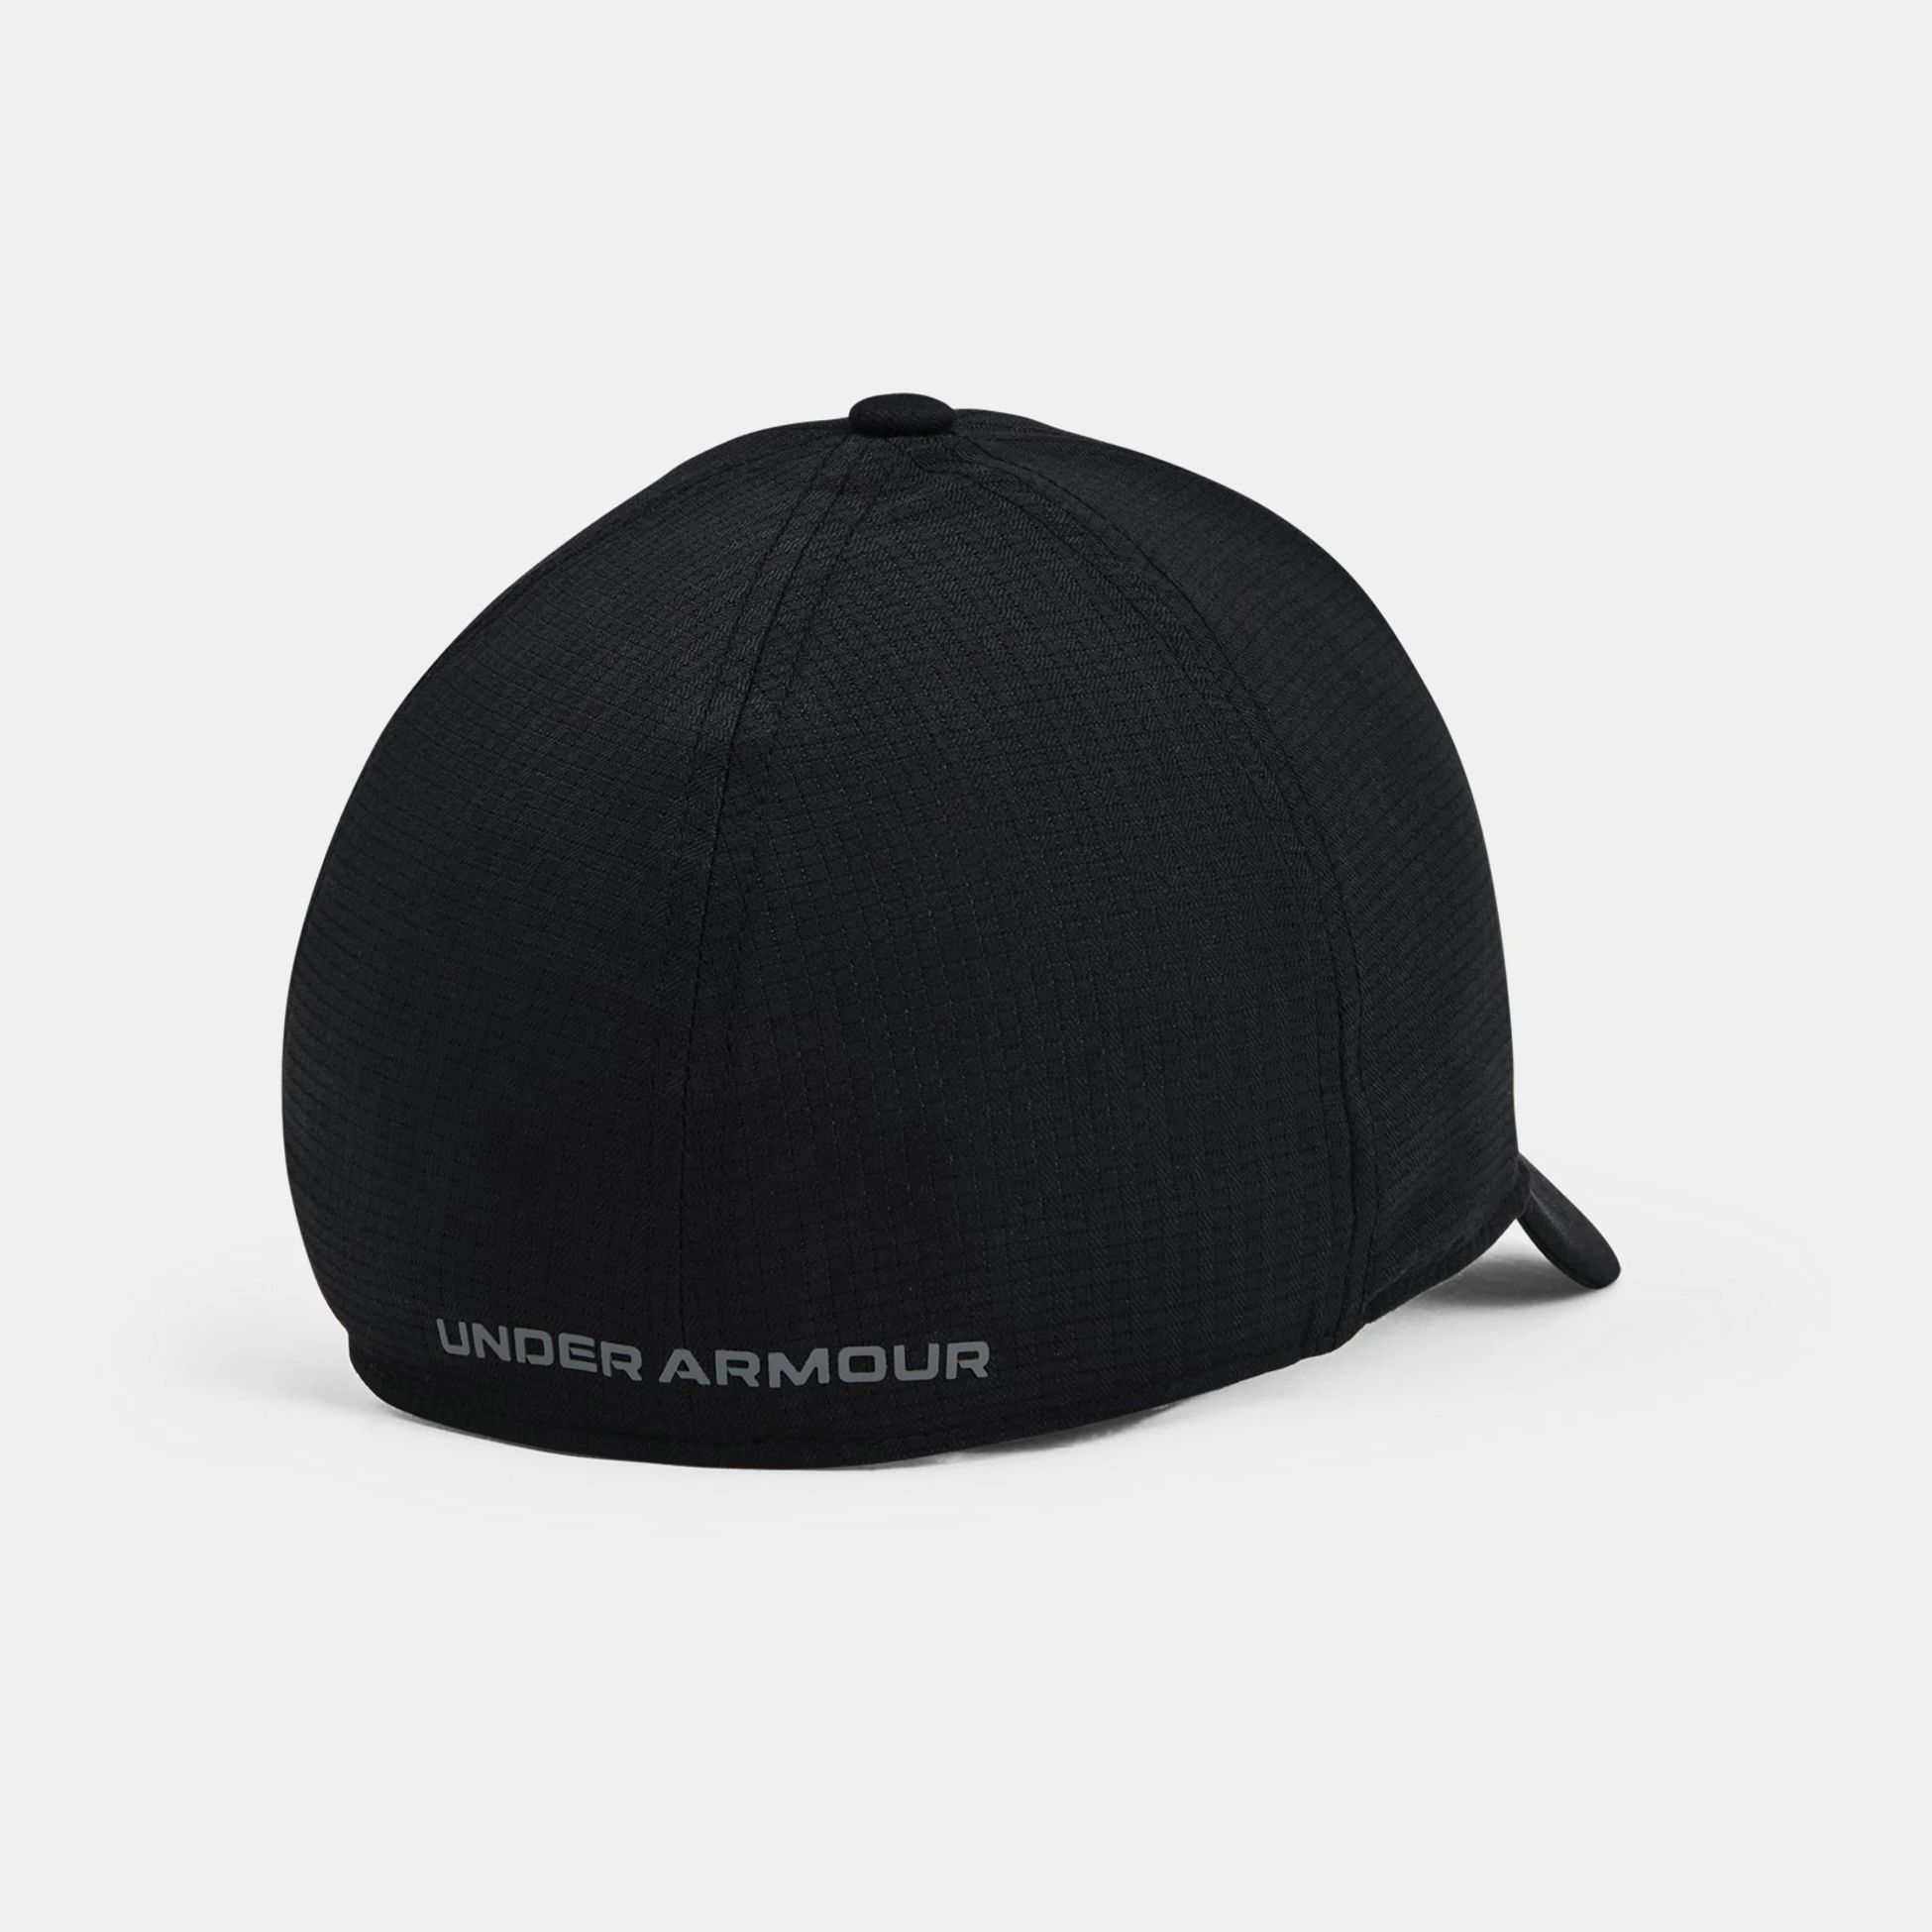 https://img1.sportconcept.com/backend_nou/content/images/-under-armourua-iso-chill-armourvent-stretch-hat-1530-20210414153842.jpg